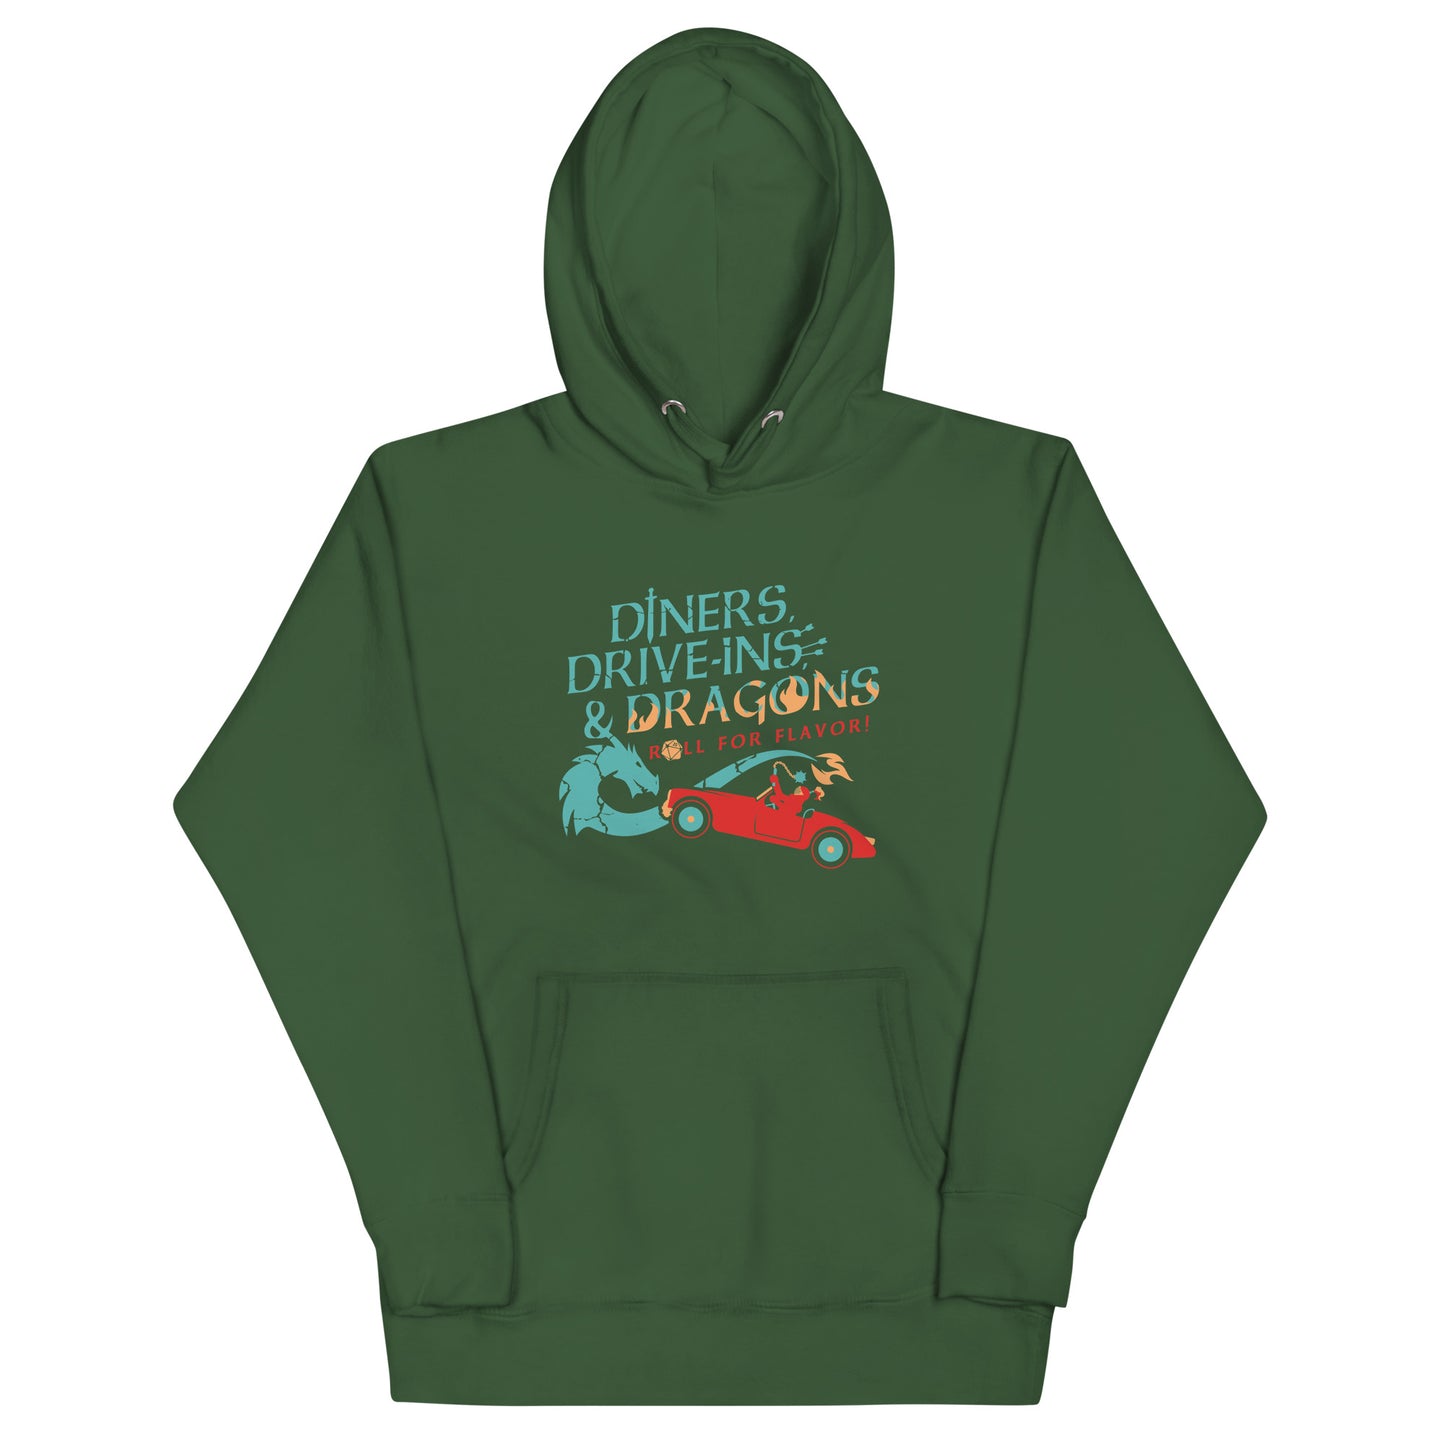 Diners, Drive-ins, & Dragons Unisex Hoodie